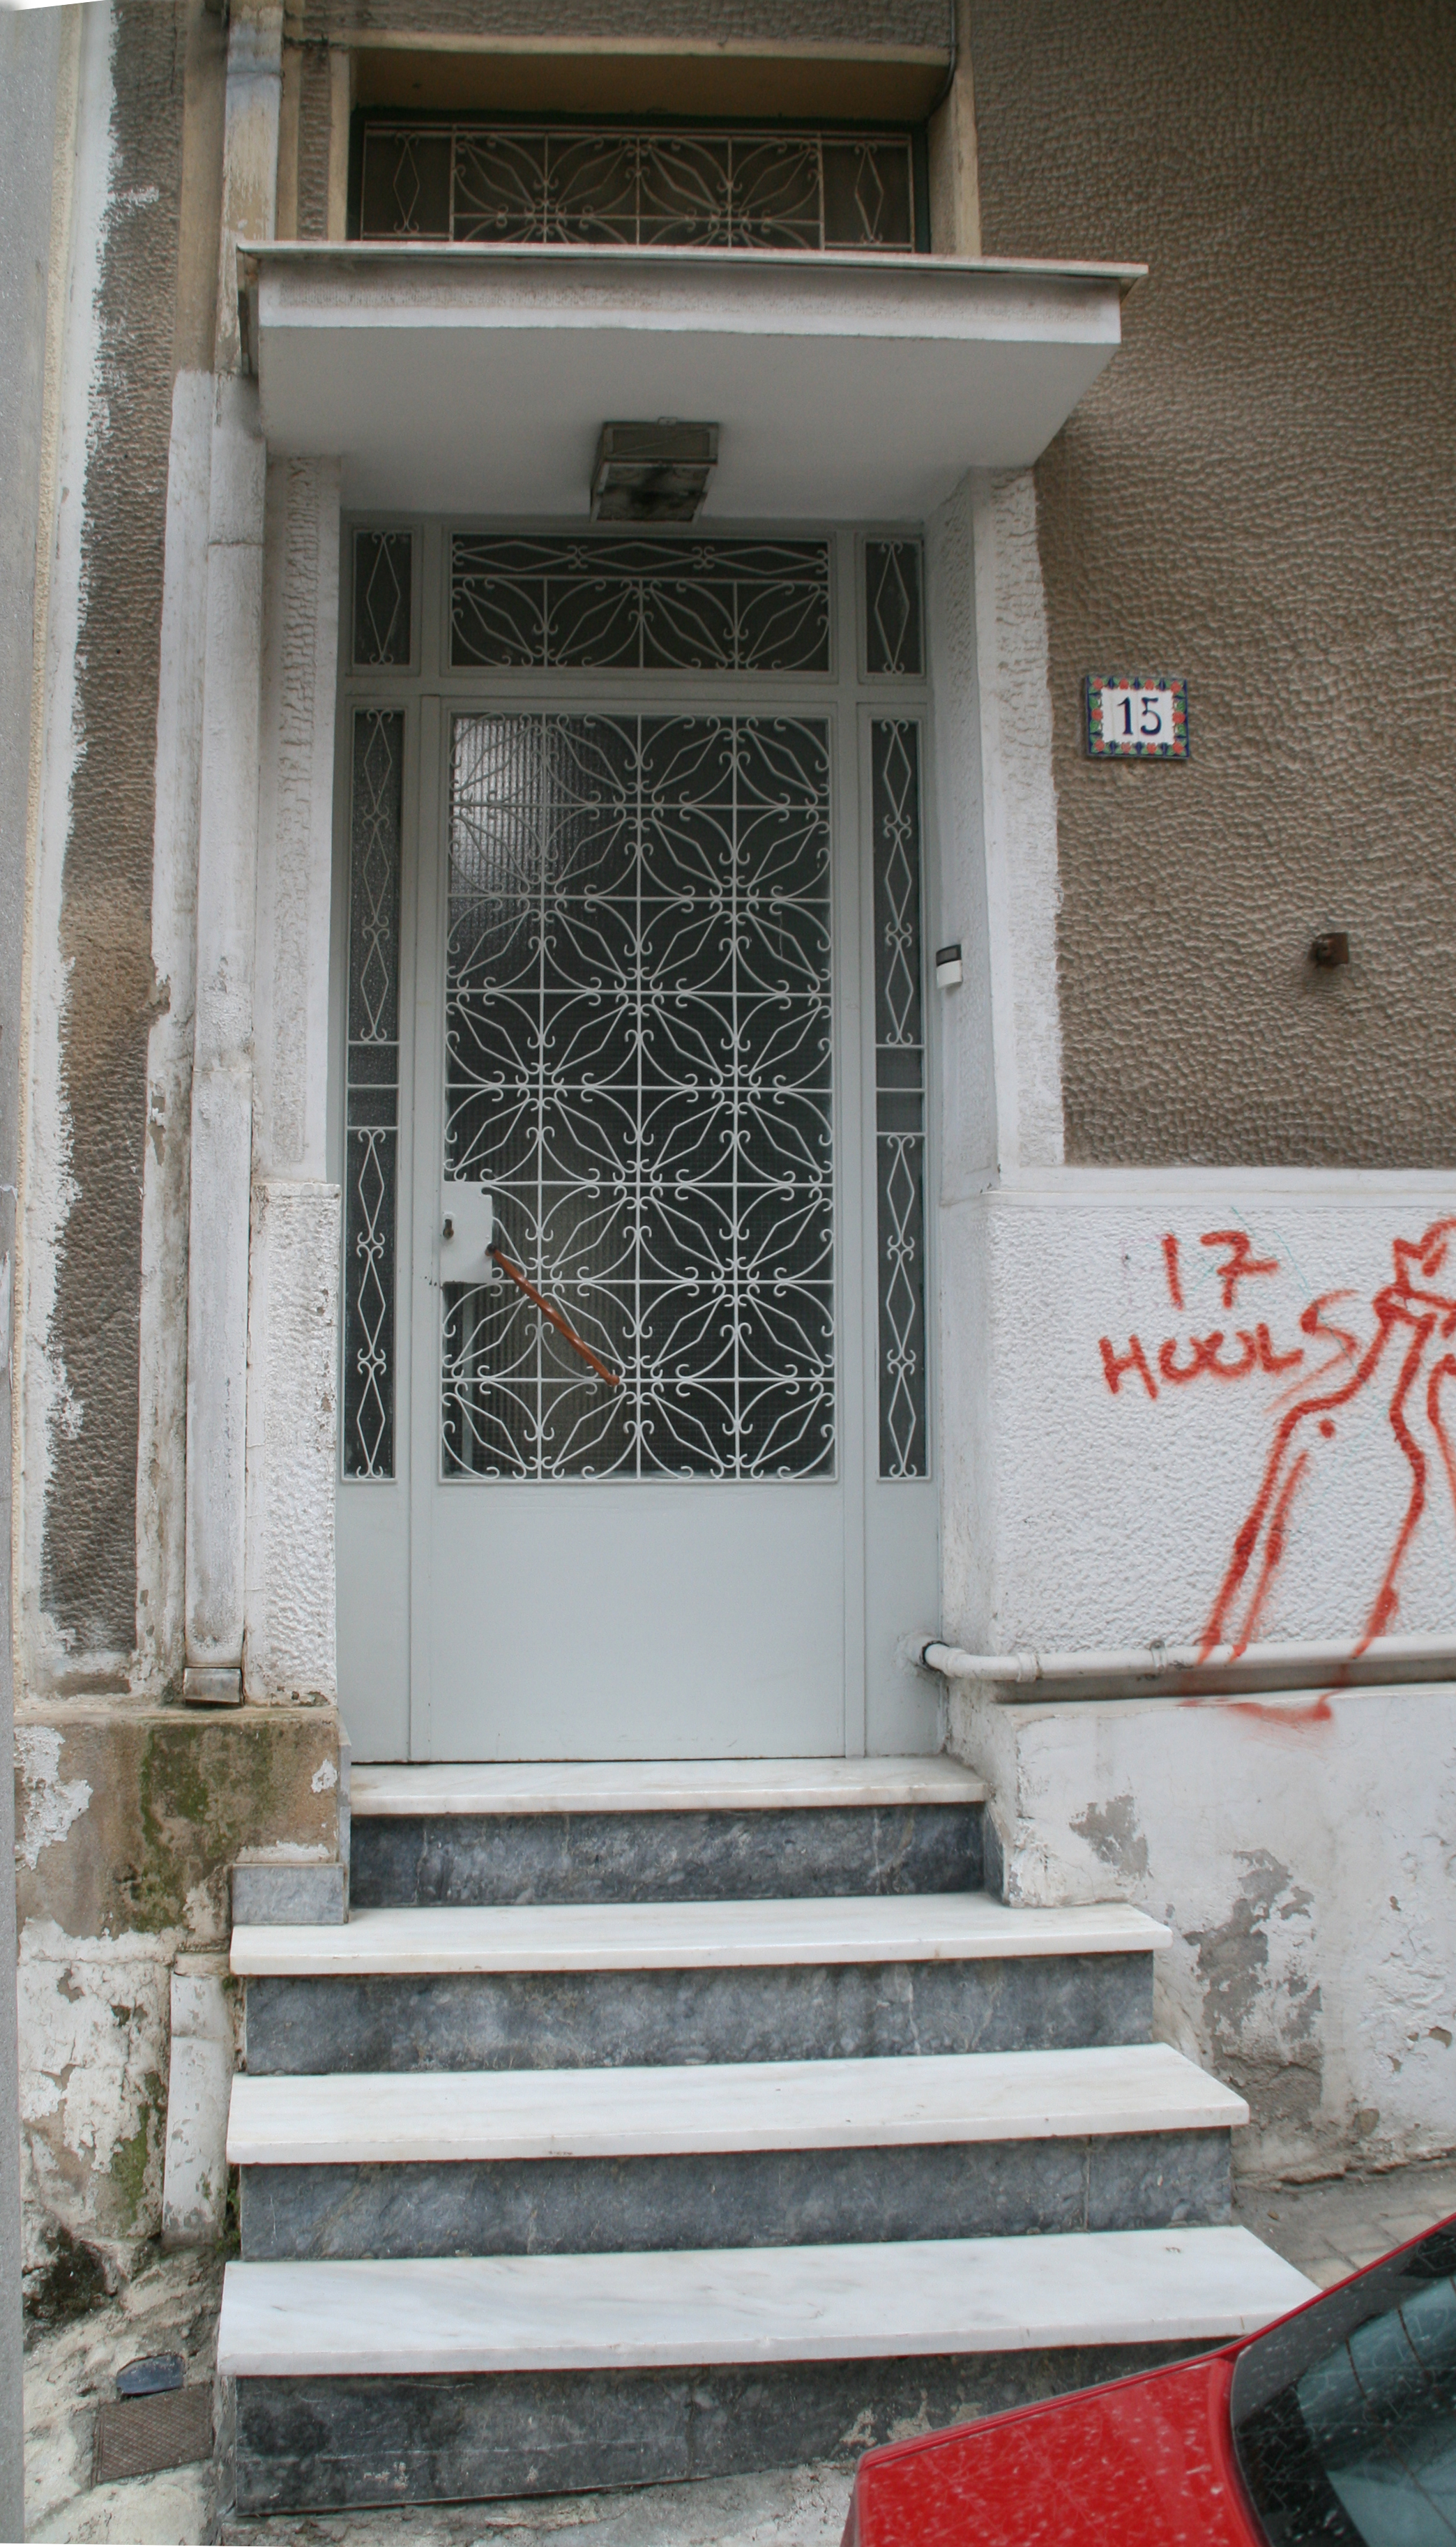 Entrance door of the later addition (2014)